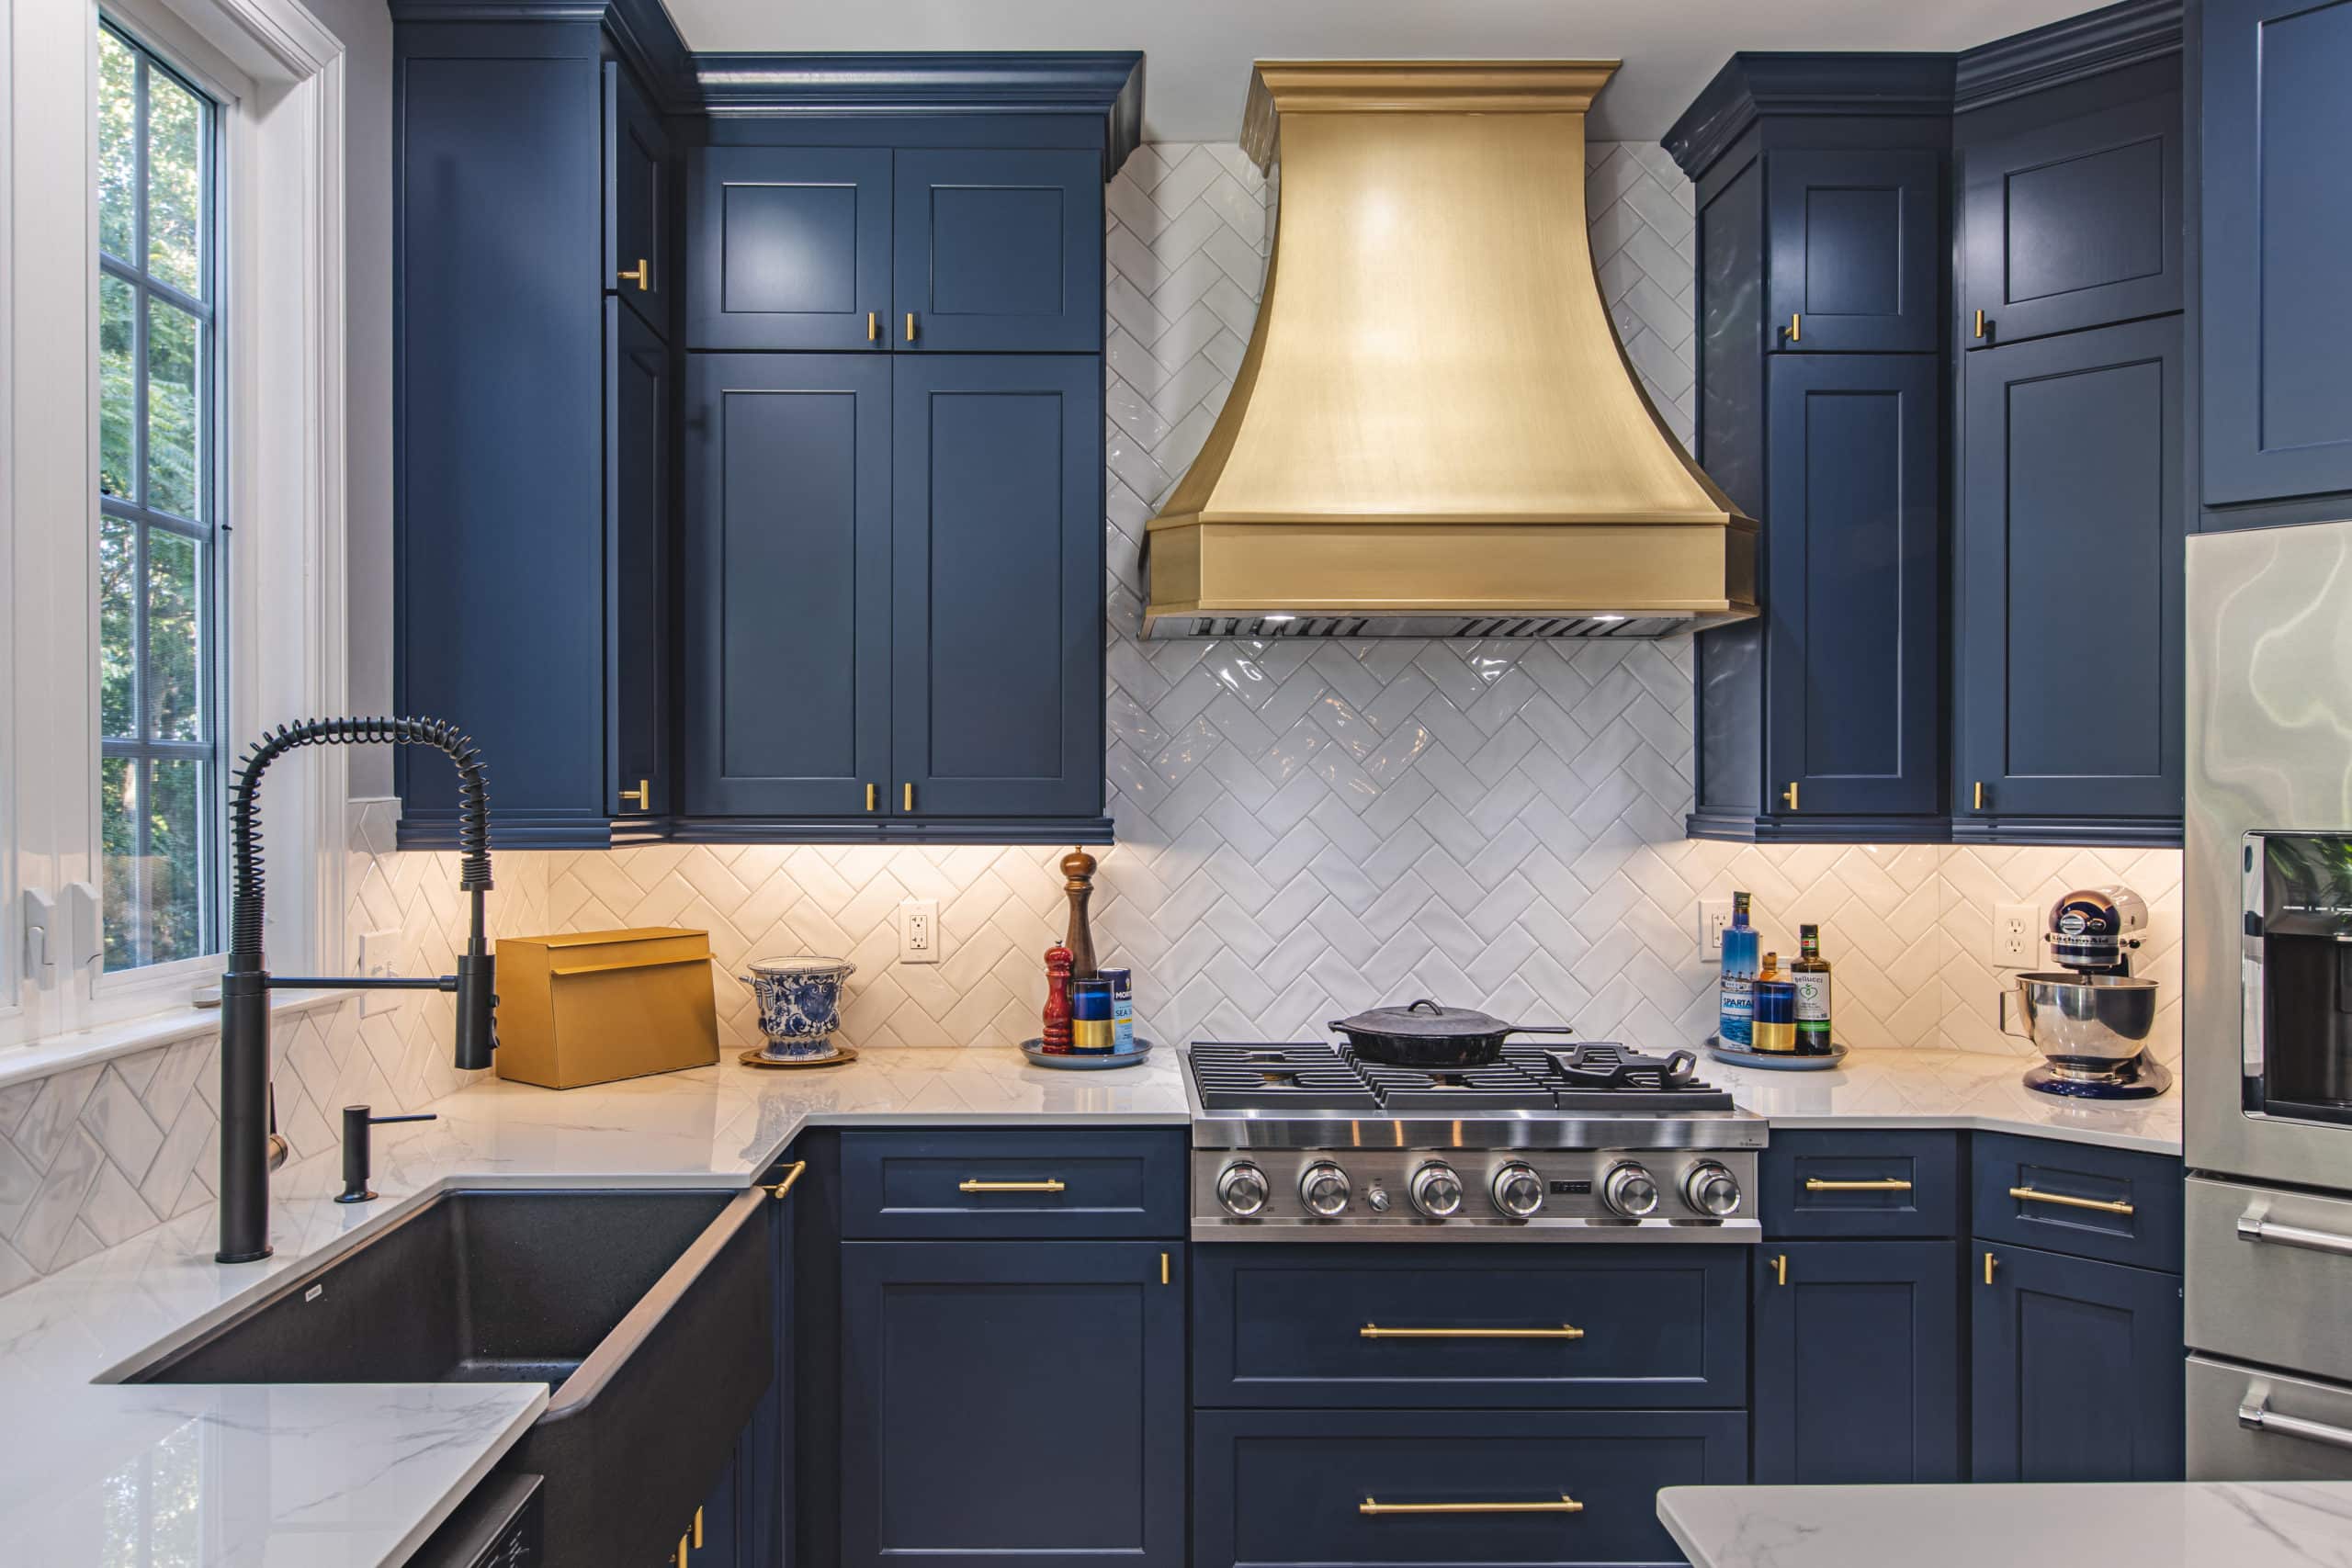 A kitchen with blue cabinets and a gold hood